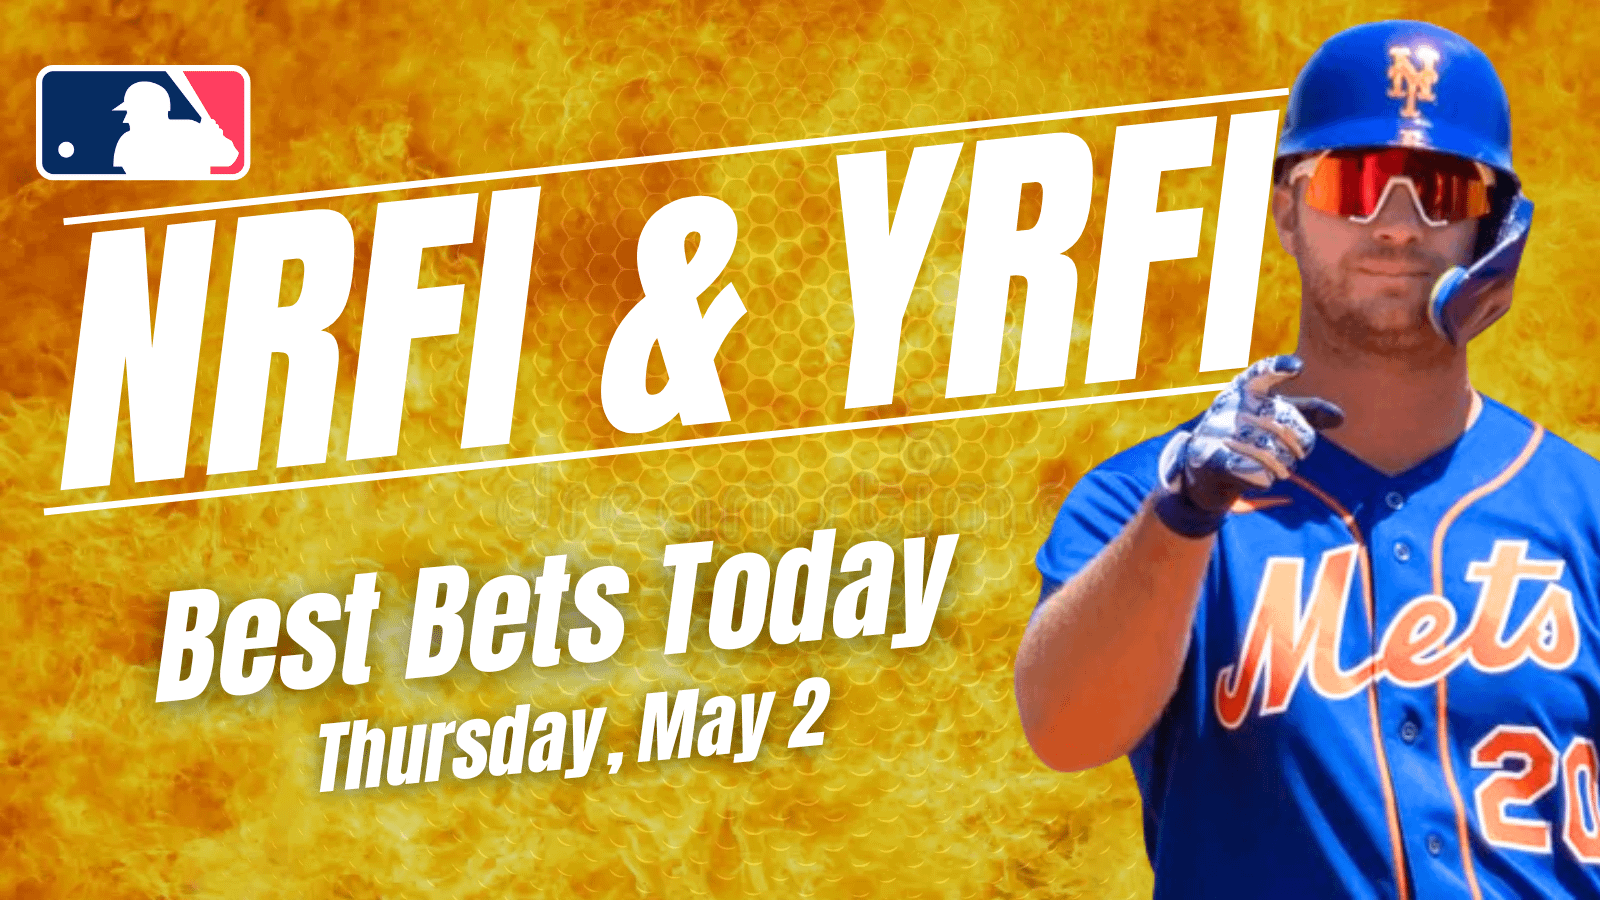 Looking for the top NRFI & YRFI bets today? We dive into the best first inning bets for Thursday, May 2, including...